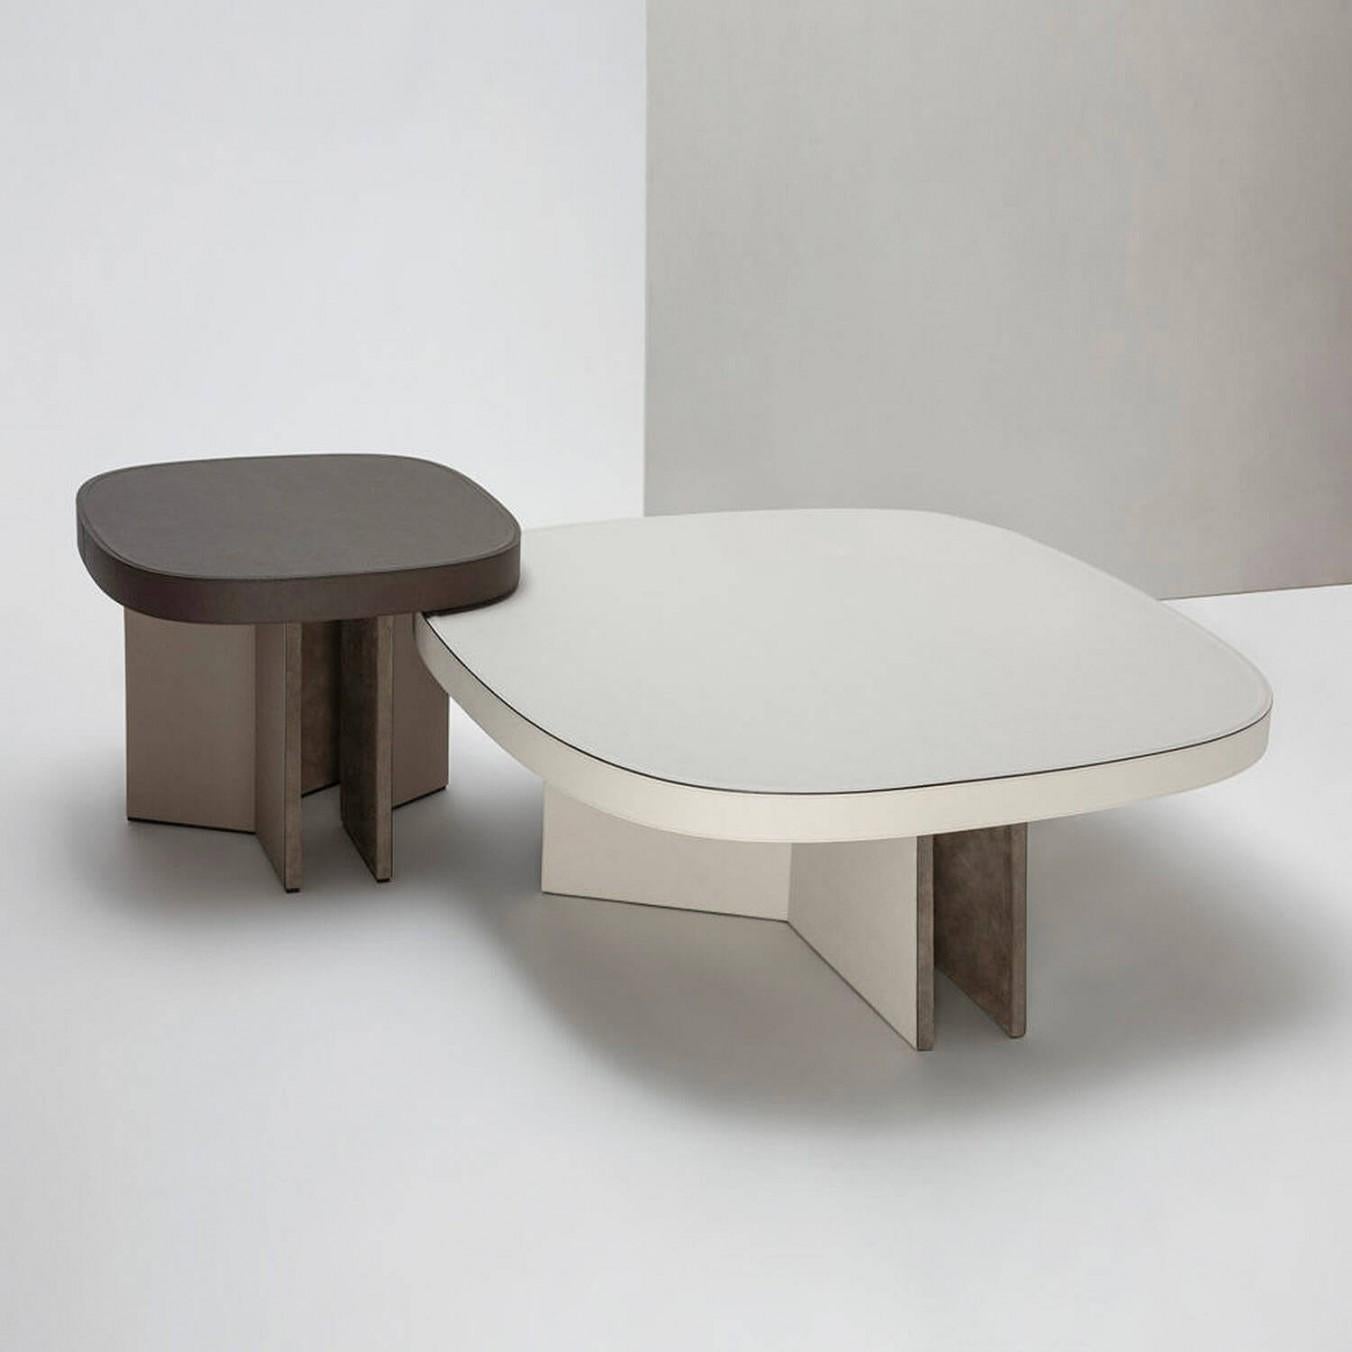 Set of 2 contemporary leather coffee tables - bivio by Stephane Parmentier for Giobagnara.

Bivio (meaning “junction” in Italian) collection is characterized by an architectural base made of three folded wooden slabs lined in suede and leather.